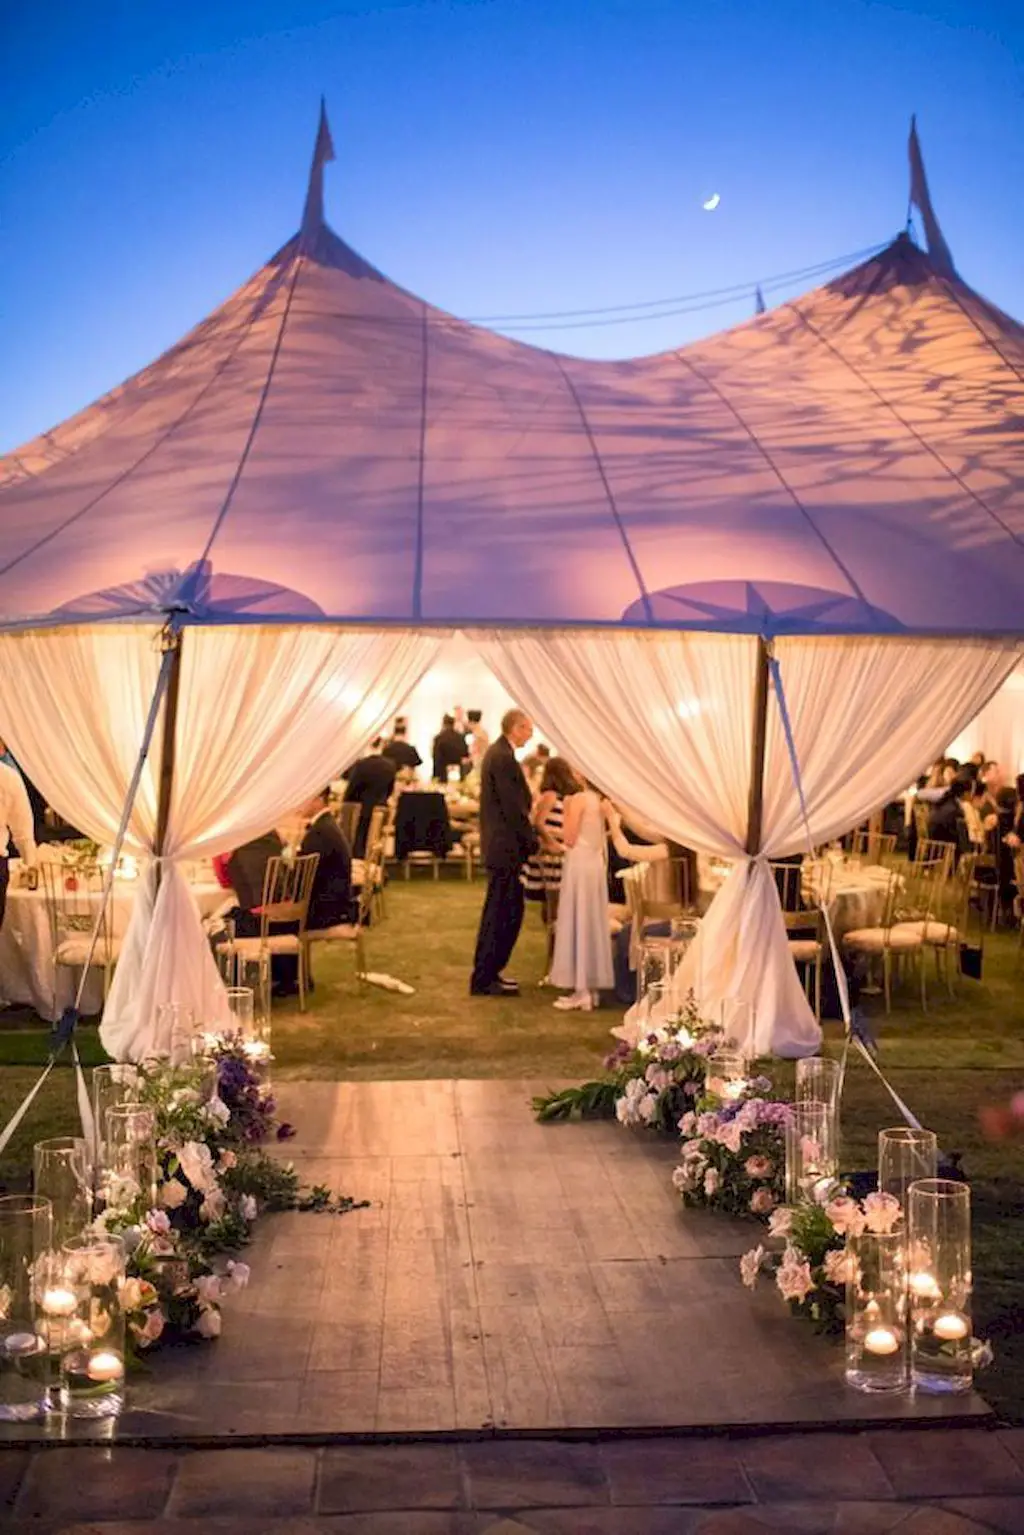 Normous 100+ Amazing Ways for Decorating Wedding Venues